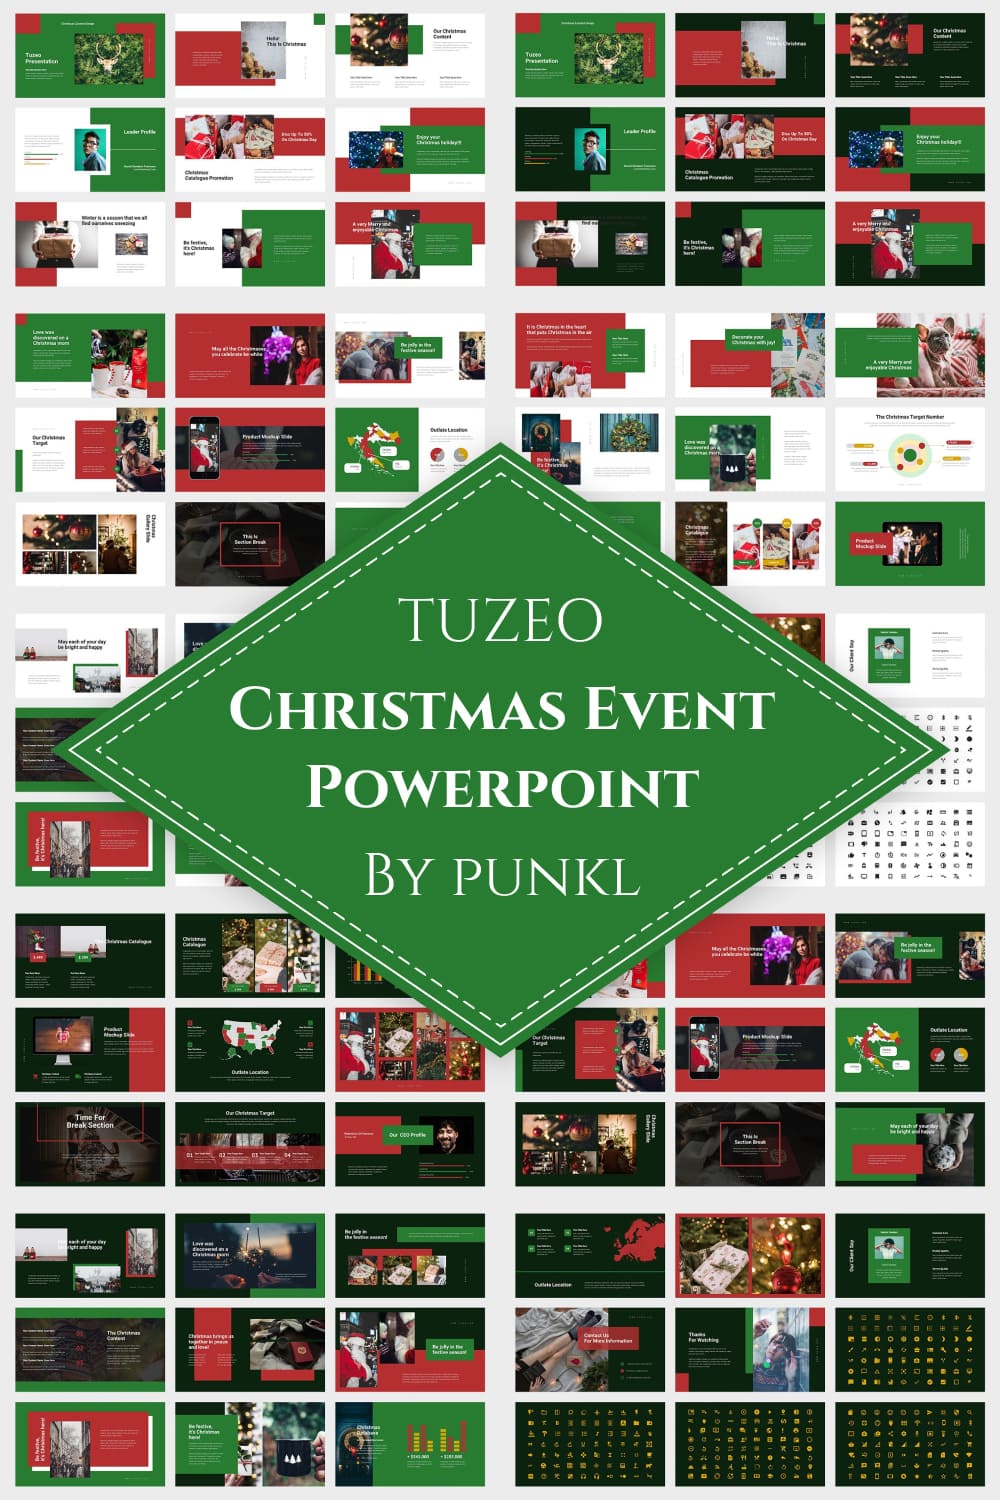 01 Tuzeo: Christmas Event Powerpoint by MasterBundles Pinterest Collage Image.